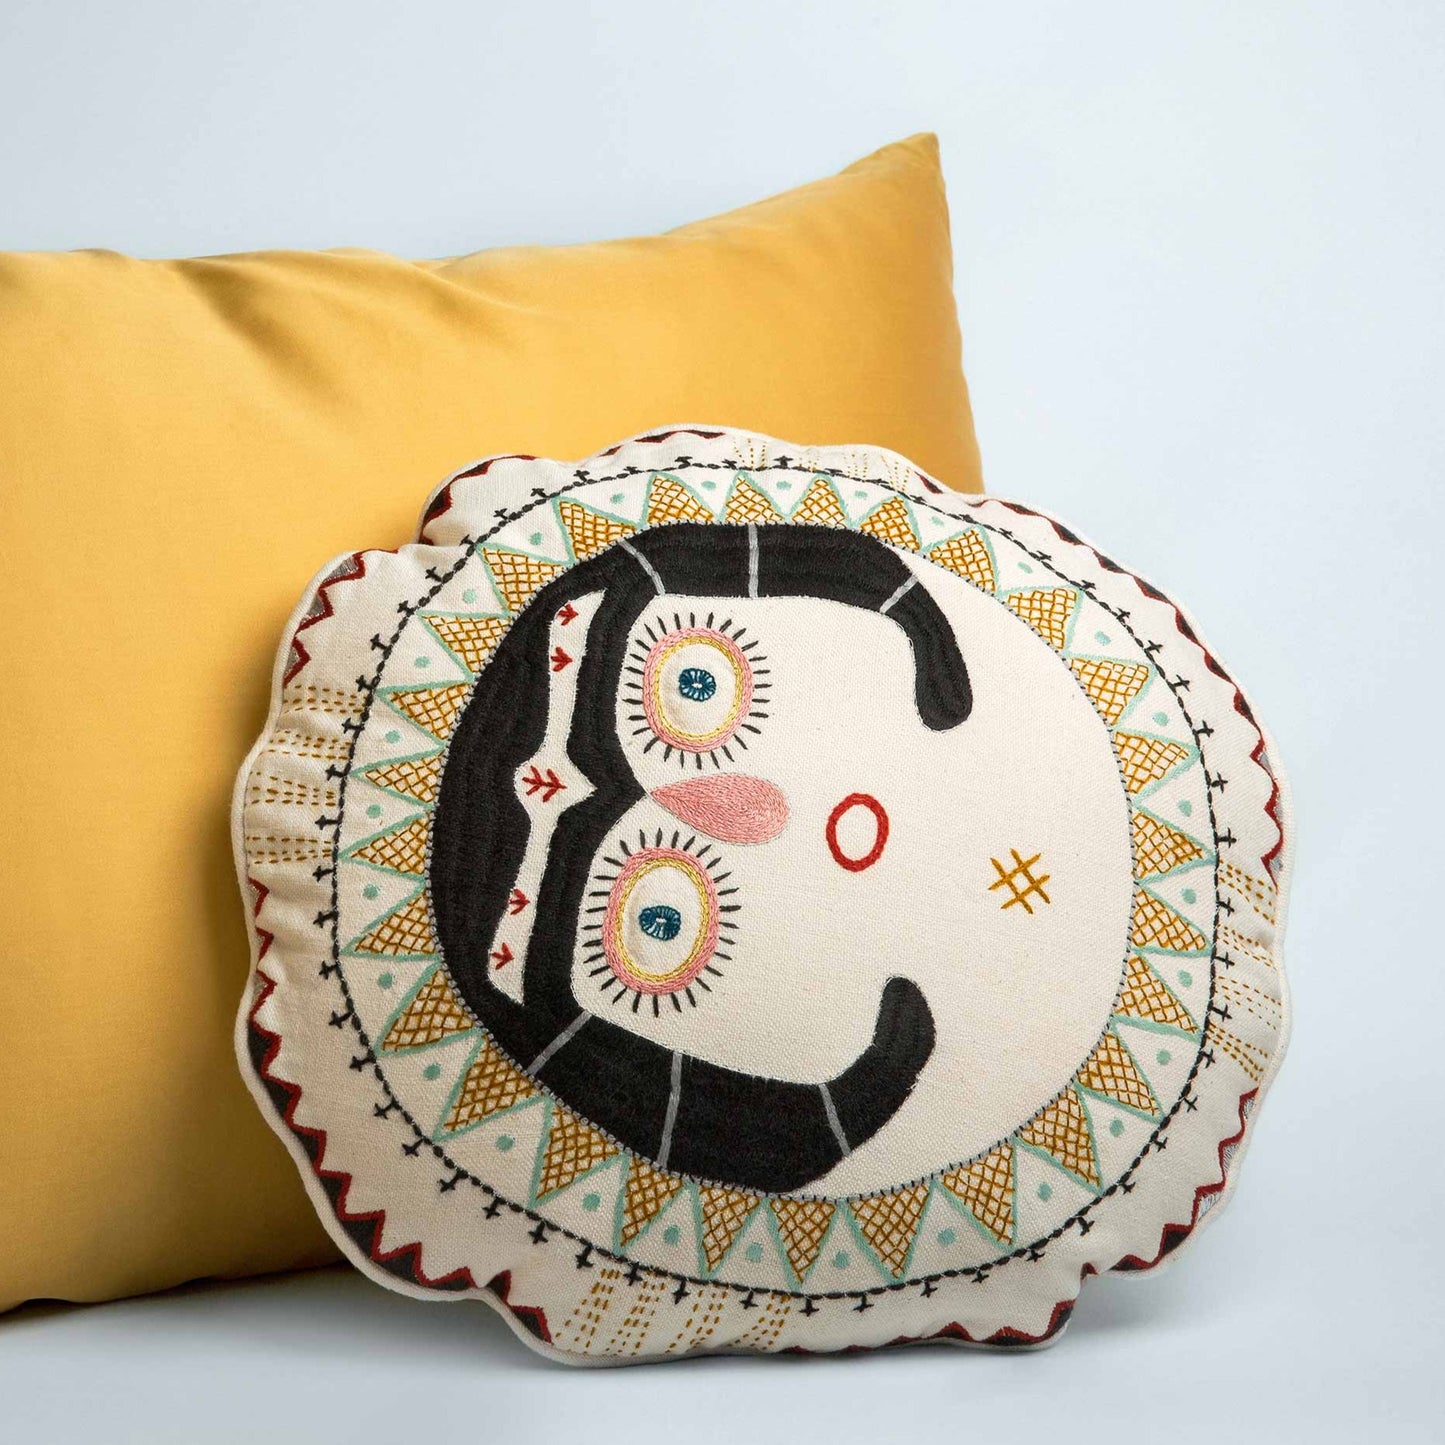 Charcoal Sun Lady cushion next to a yellow pillow